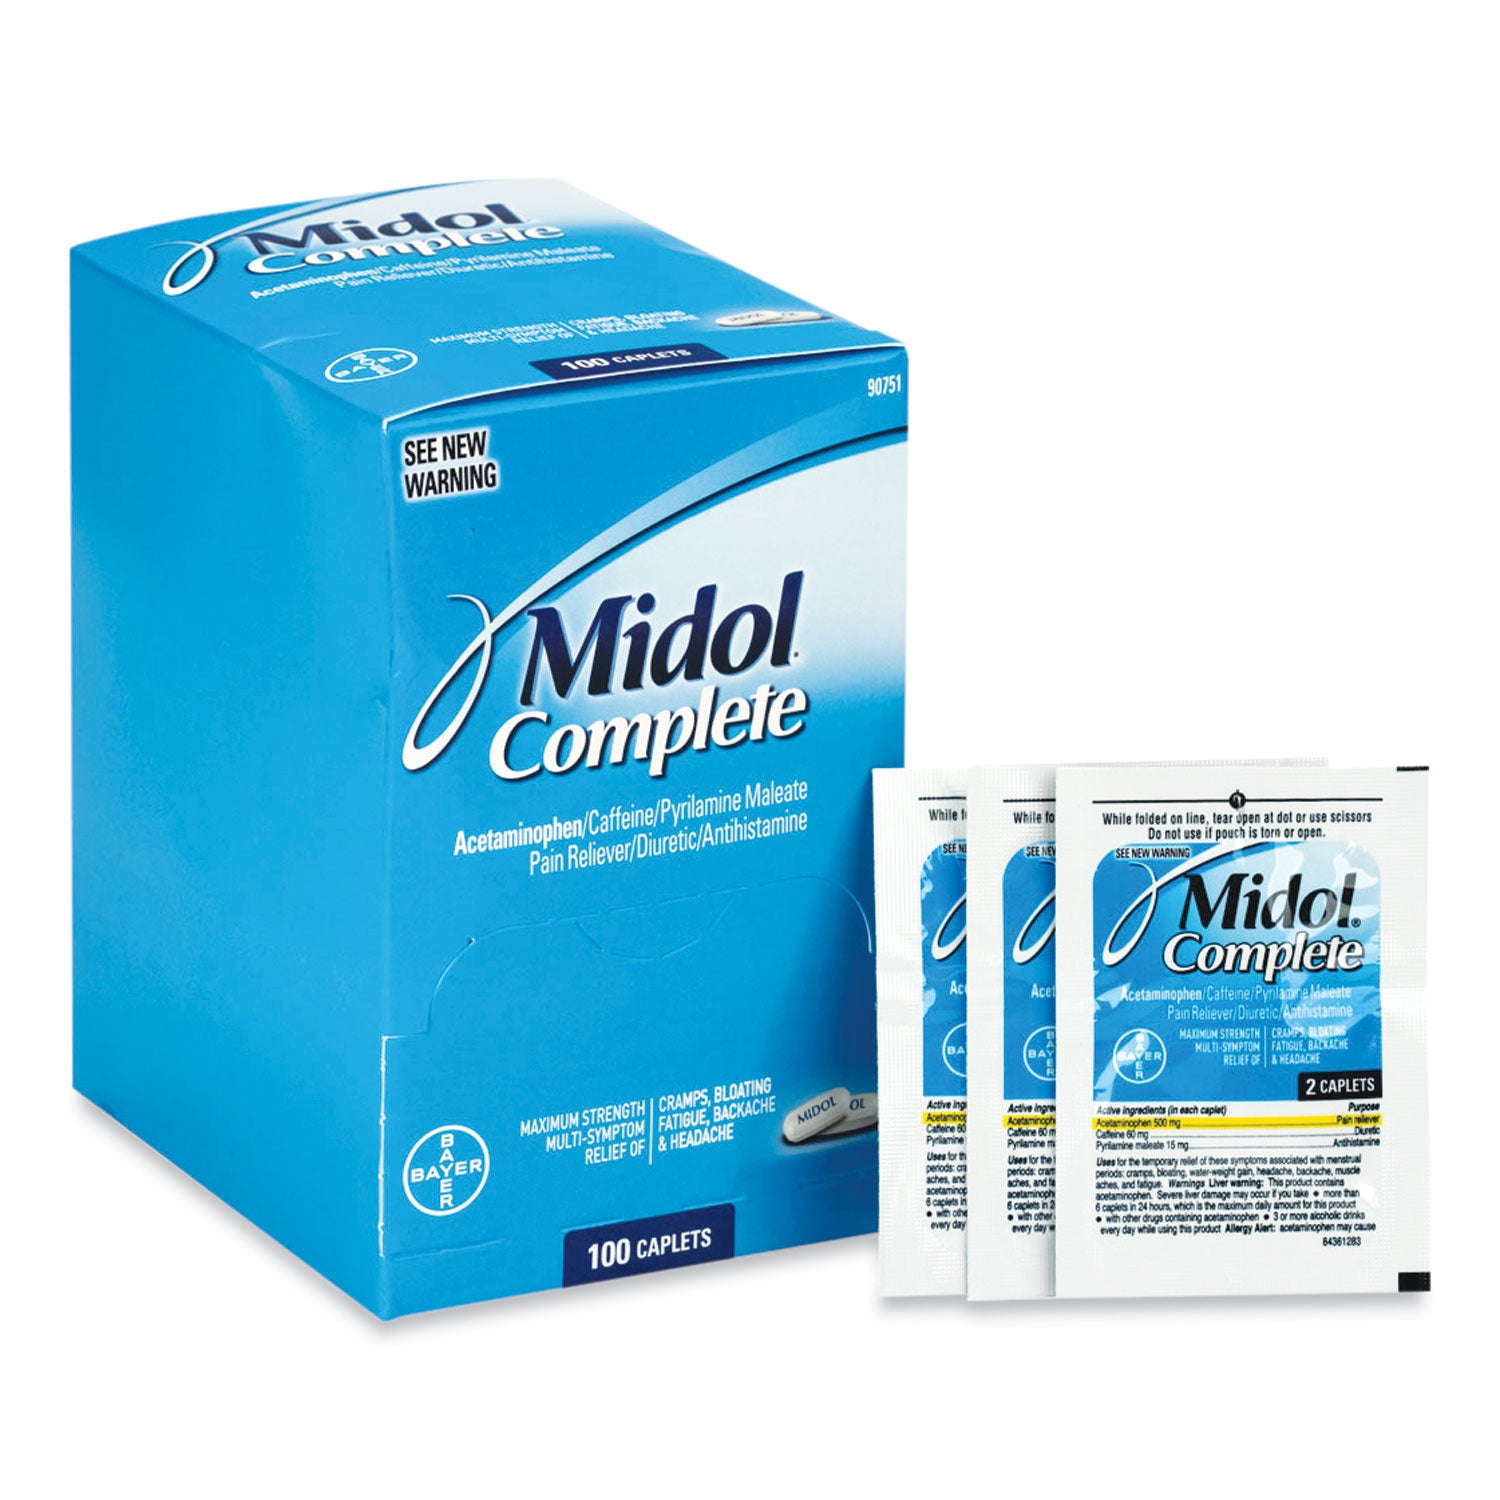 complete-menstrual-caplets-two-pack-50-packs-box_fao90751 - 1